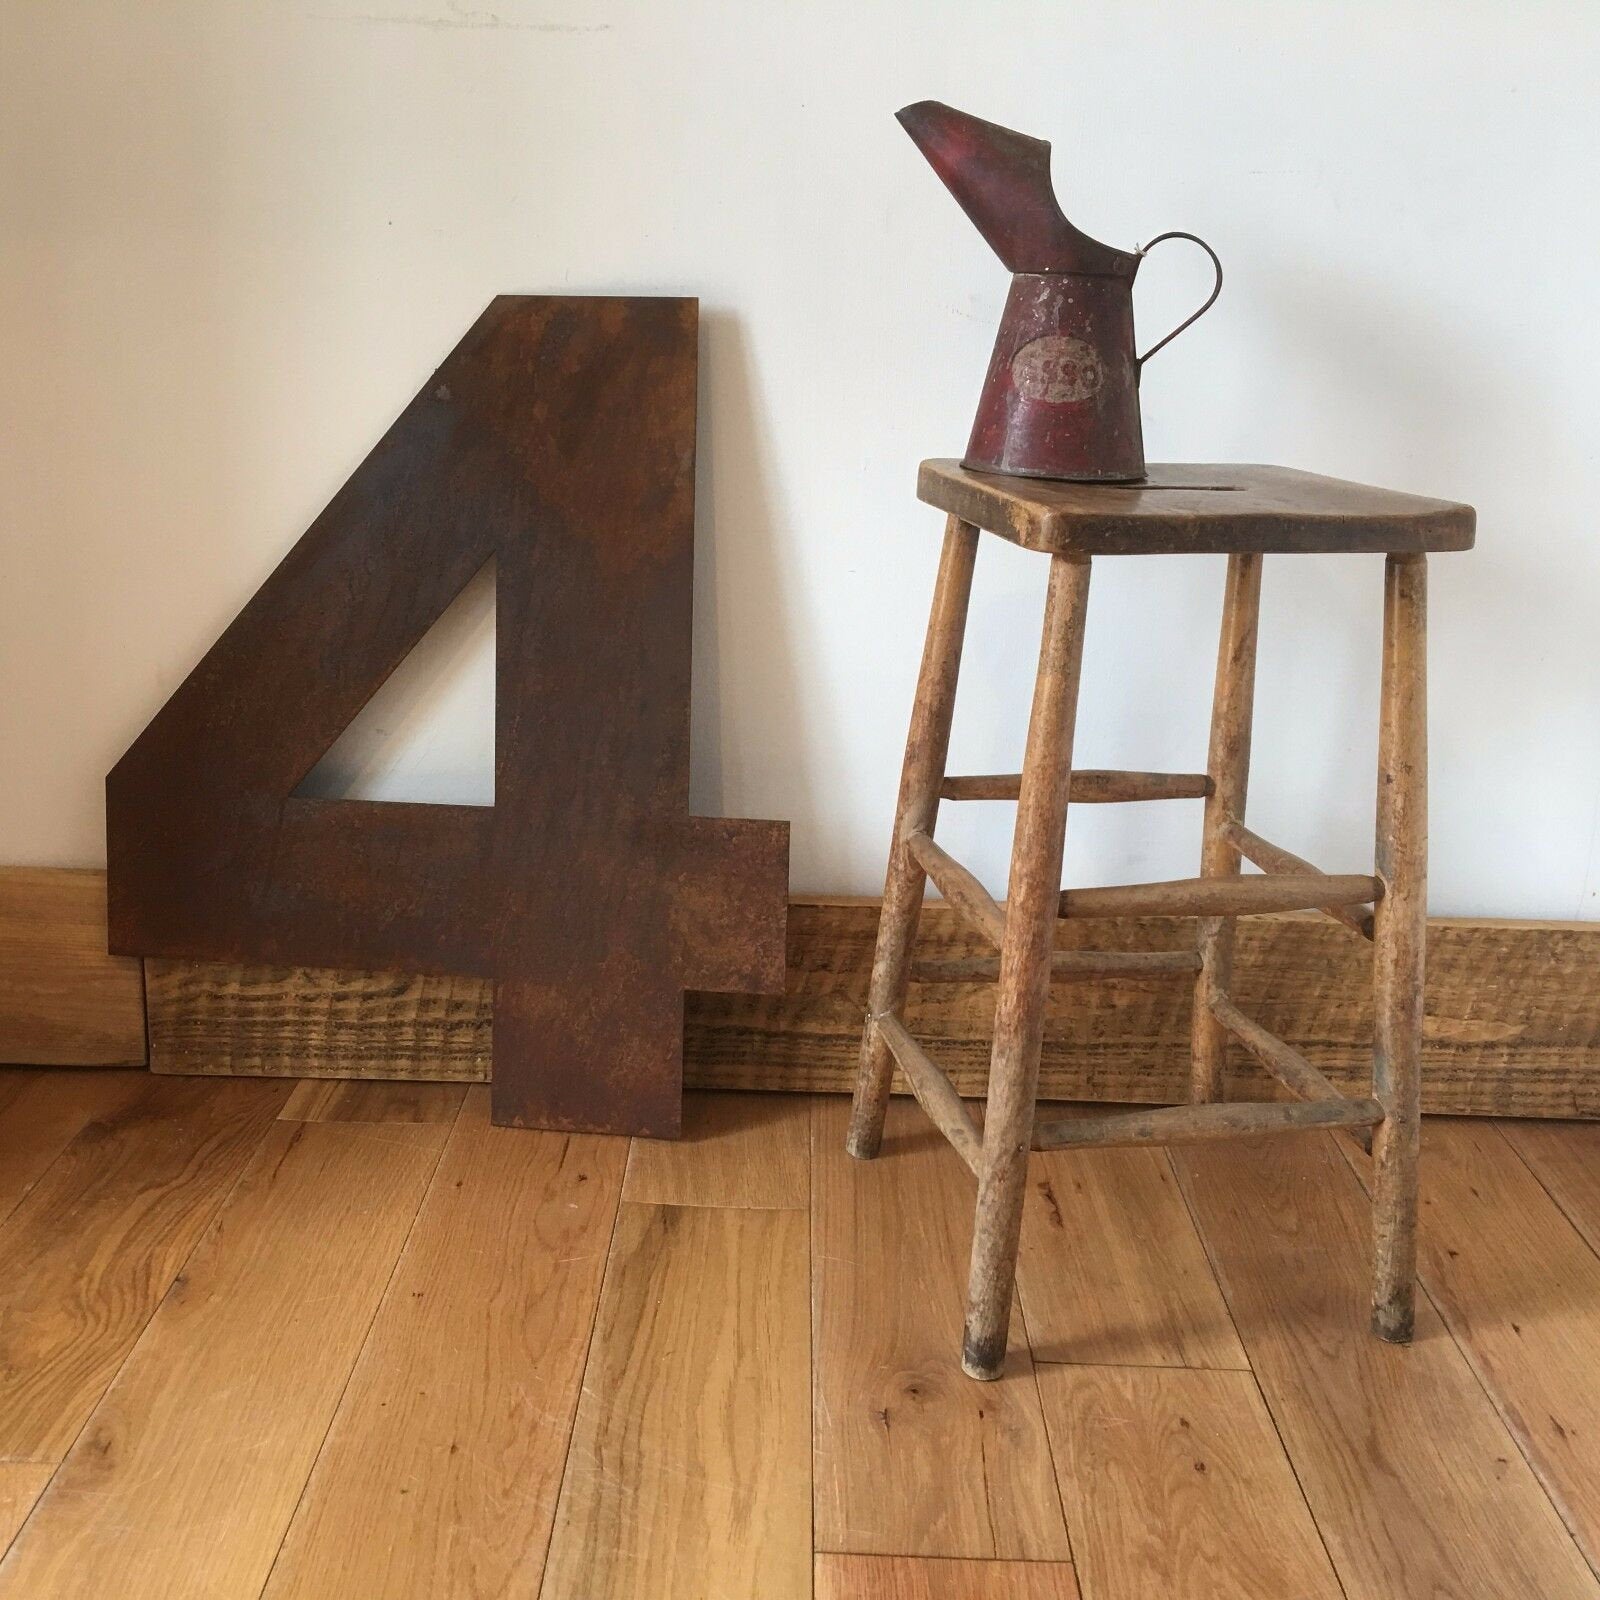 70cms tall rusty metal number 4